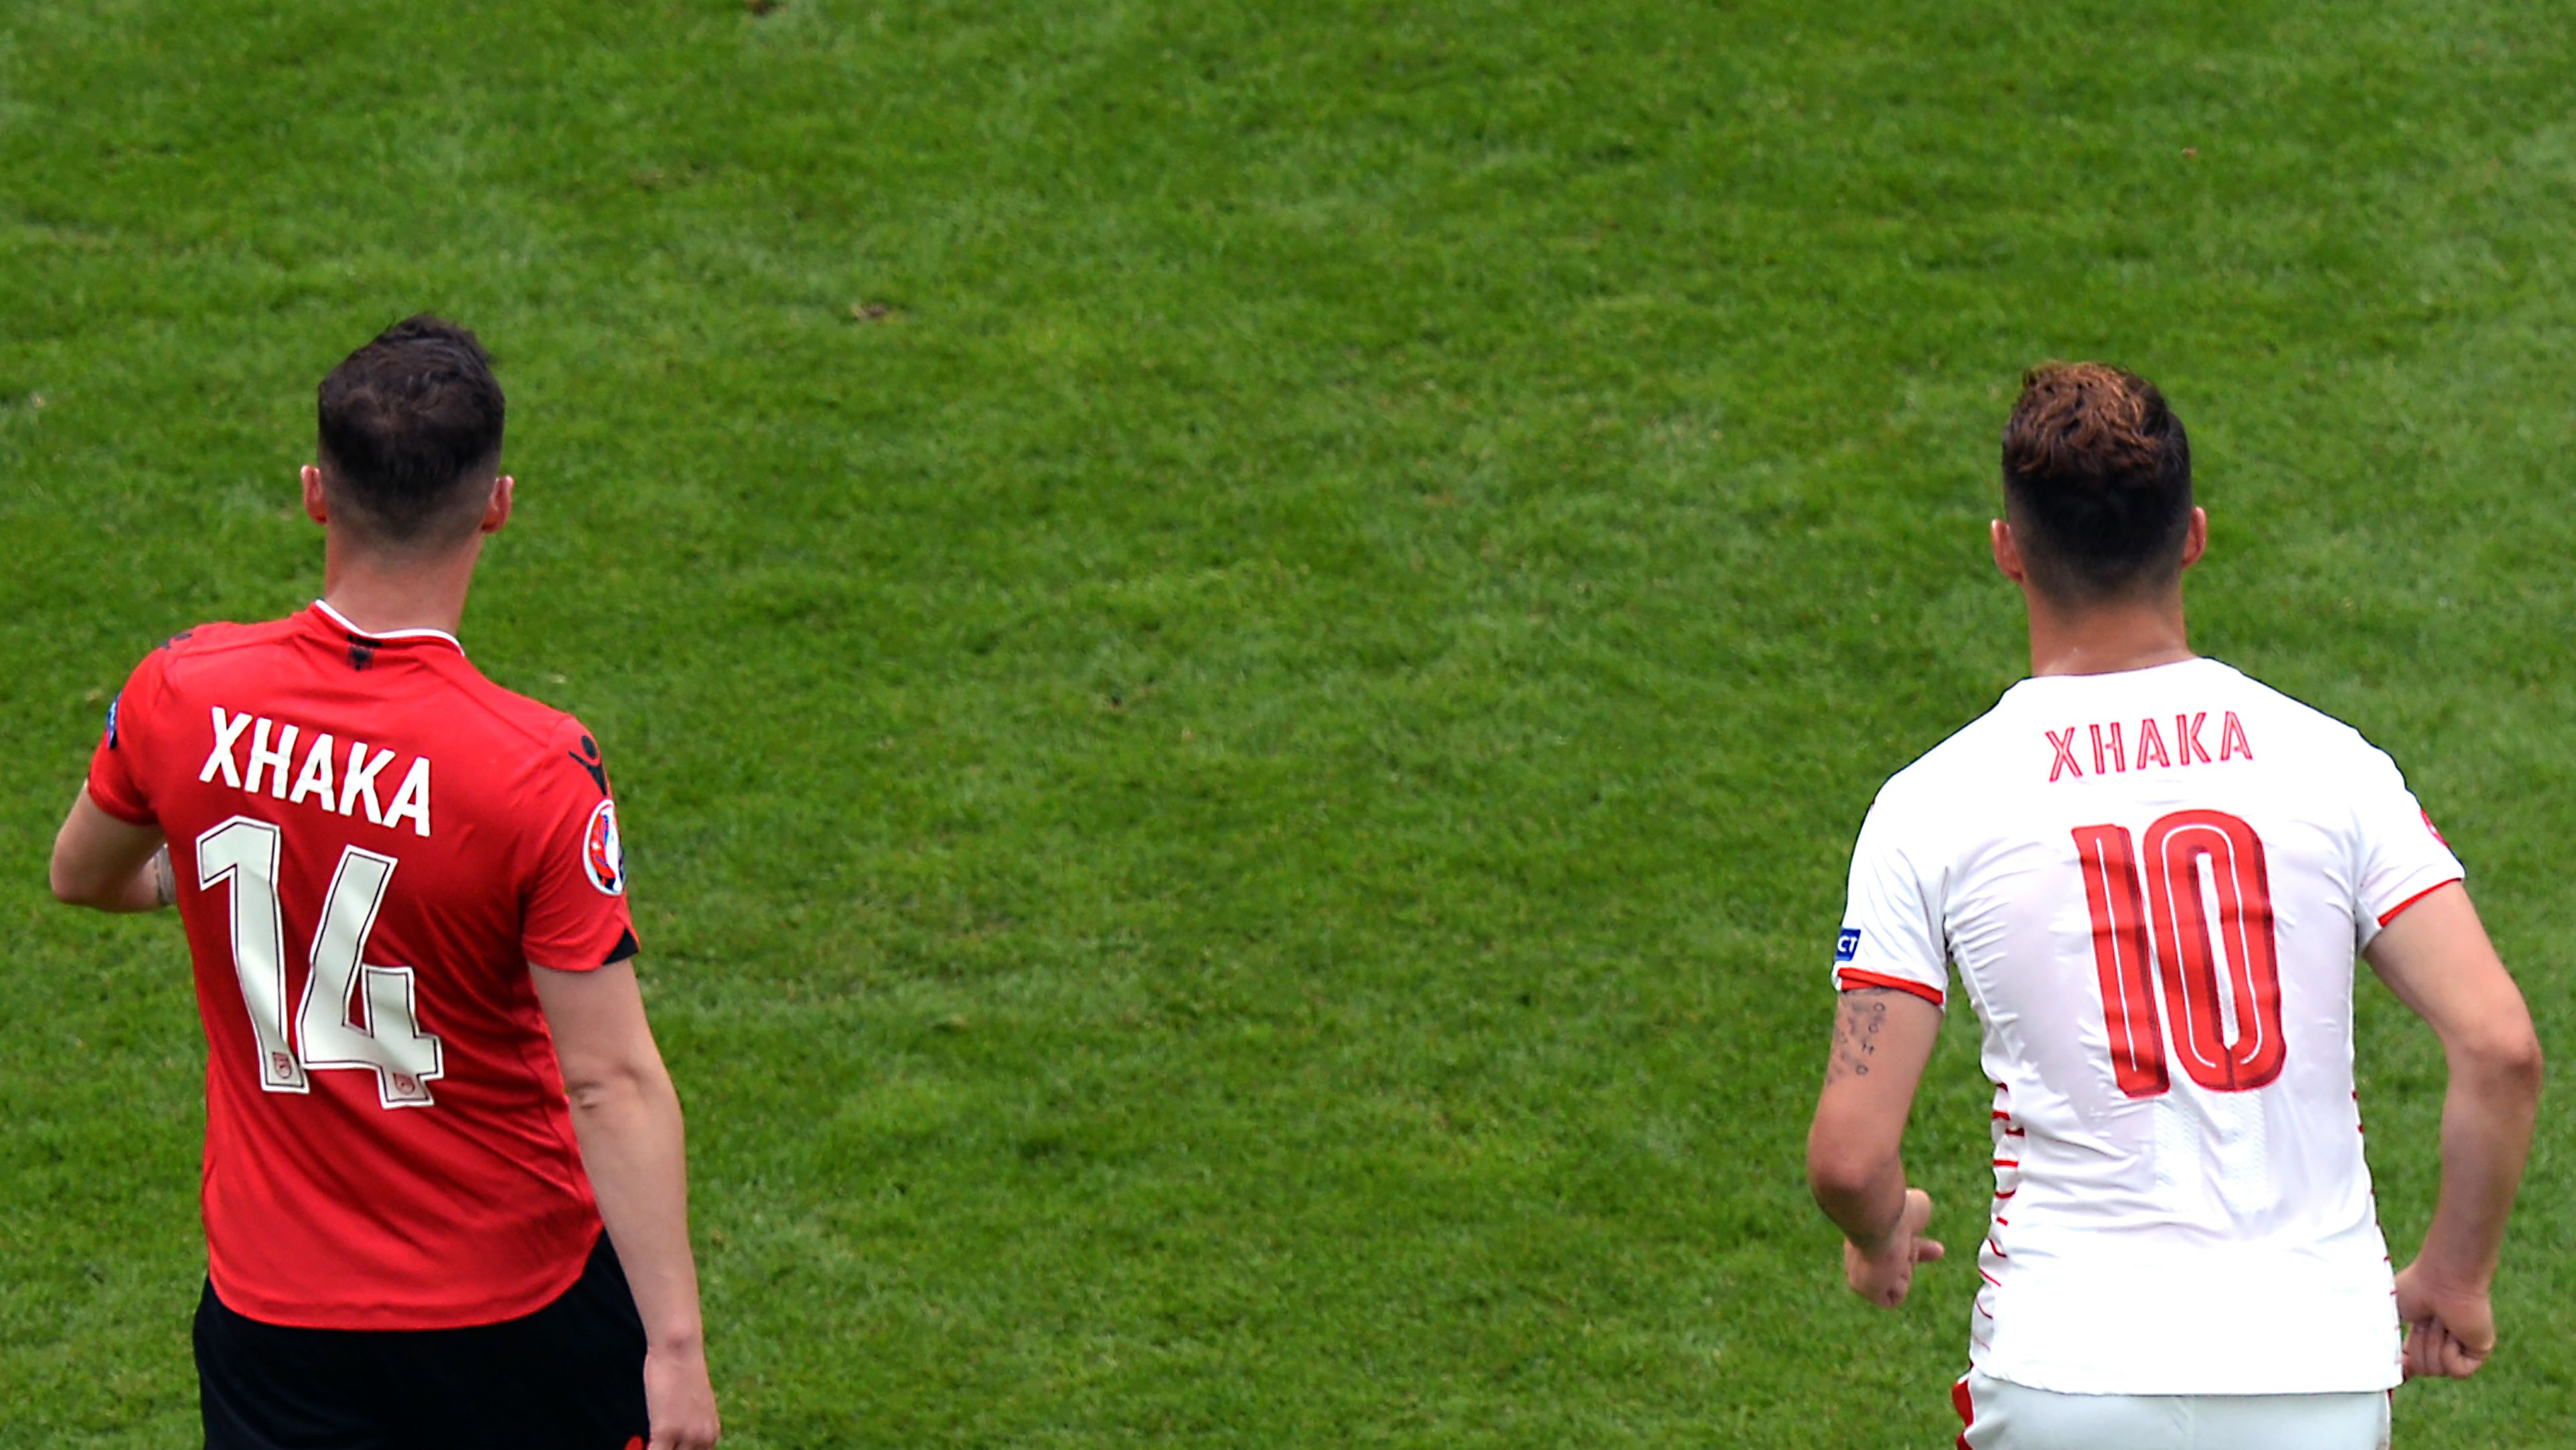 Albania's midfielder Taulant Xhaka (L) walks next to his brother Switzerland's midfielder Granit Xhaka during the Euro 2016 group A football match between Albania and Switzerland at the Bollaert-Delelis Stadium in Lens on June 11, 2016. / AFP / Denis CHARLET        (Photo credit should read DENIS CHARLET/AFP/Getty Images)